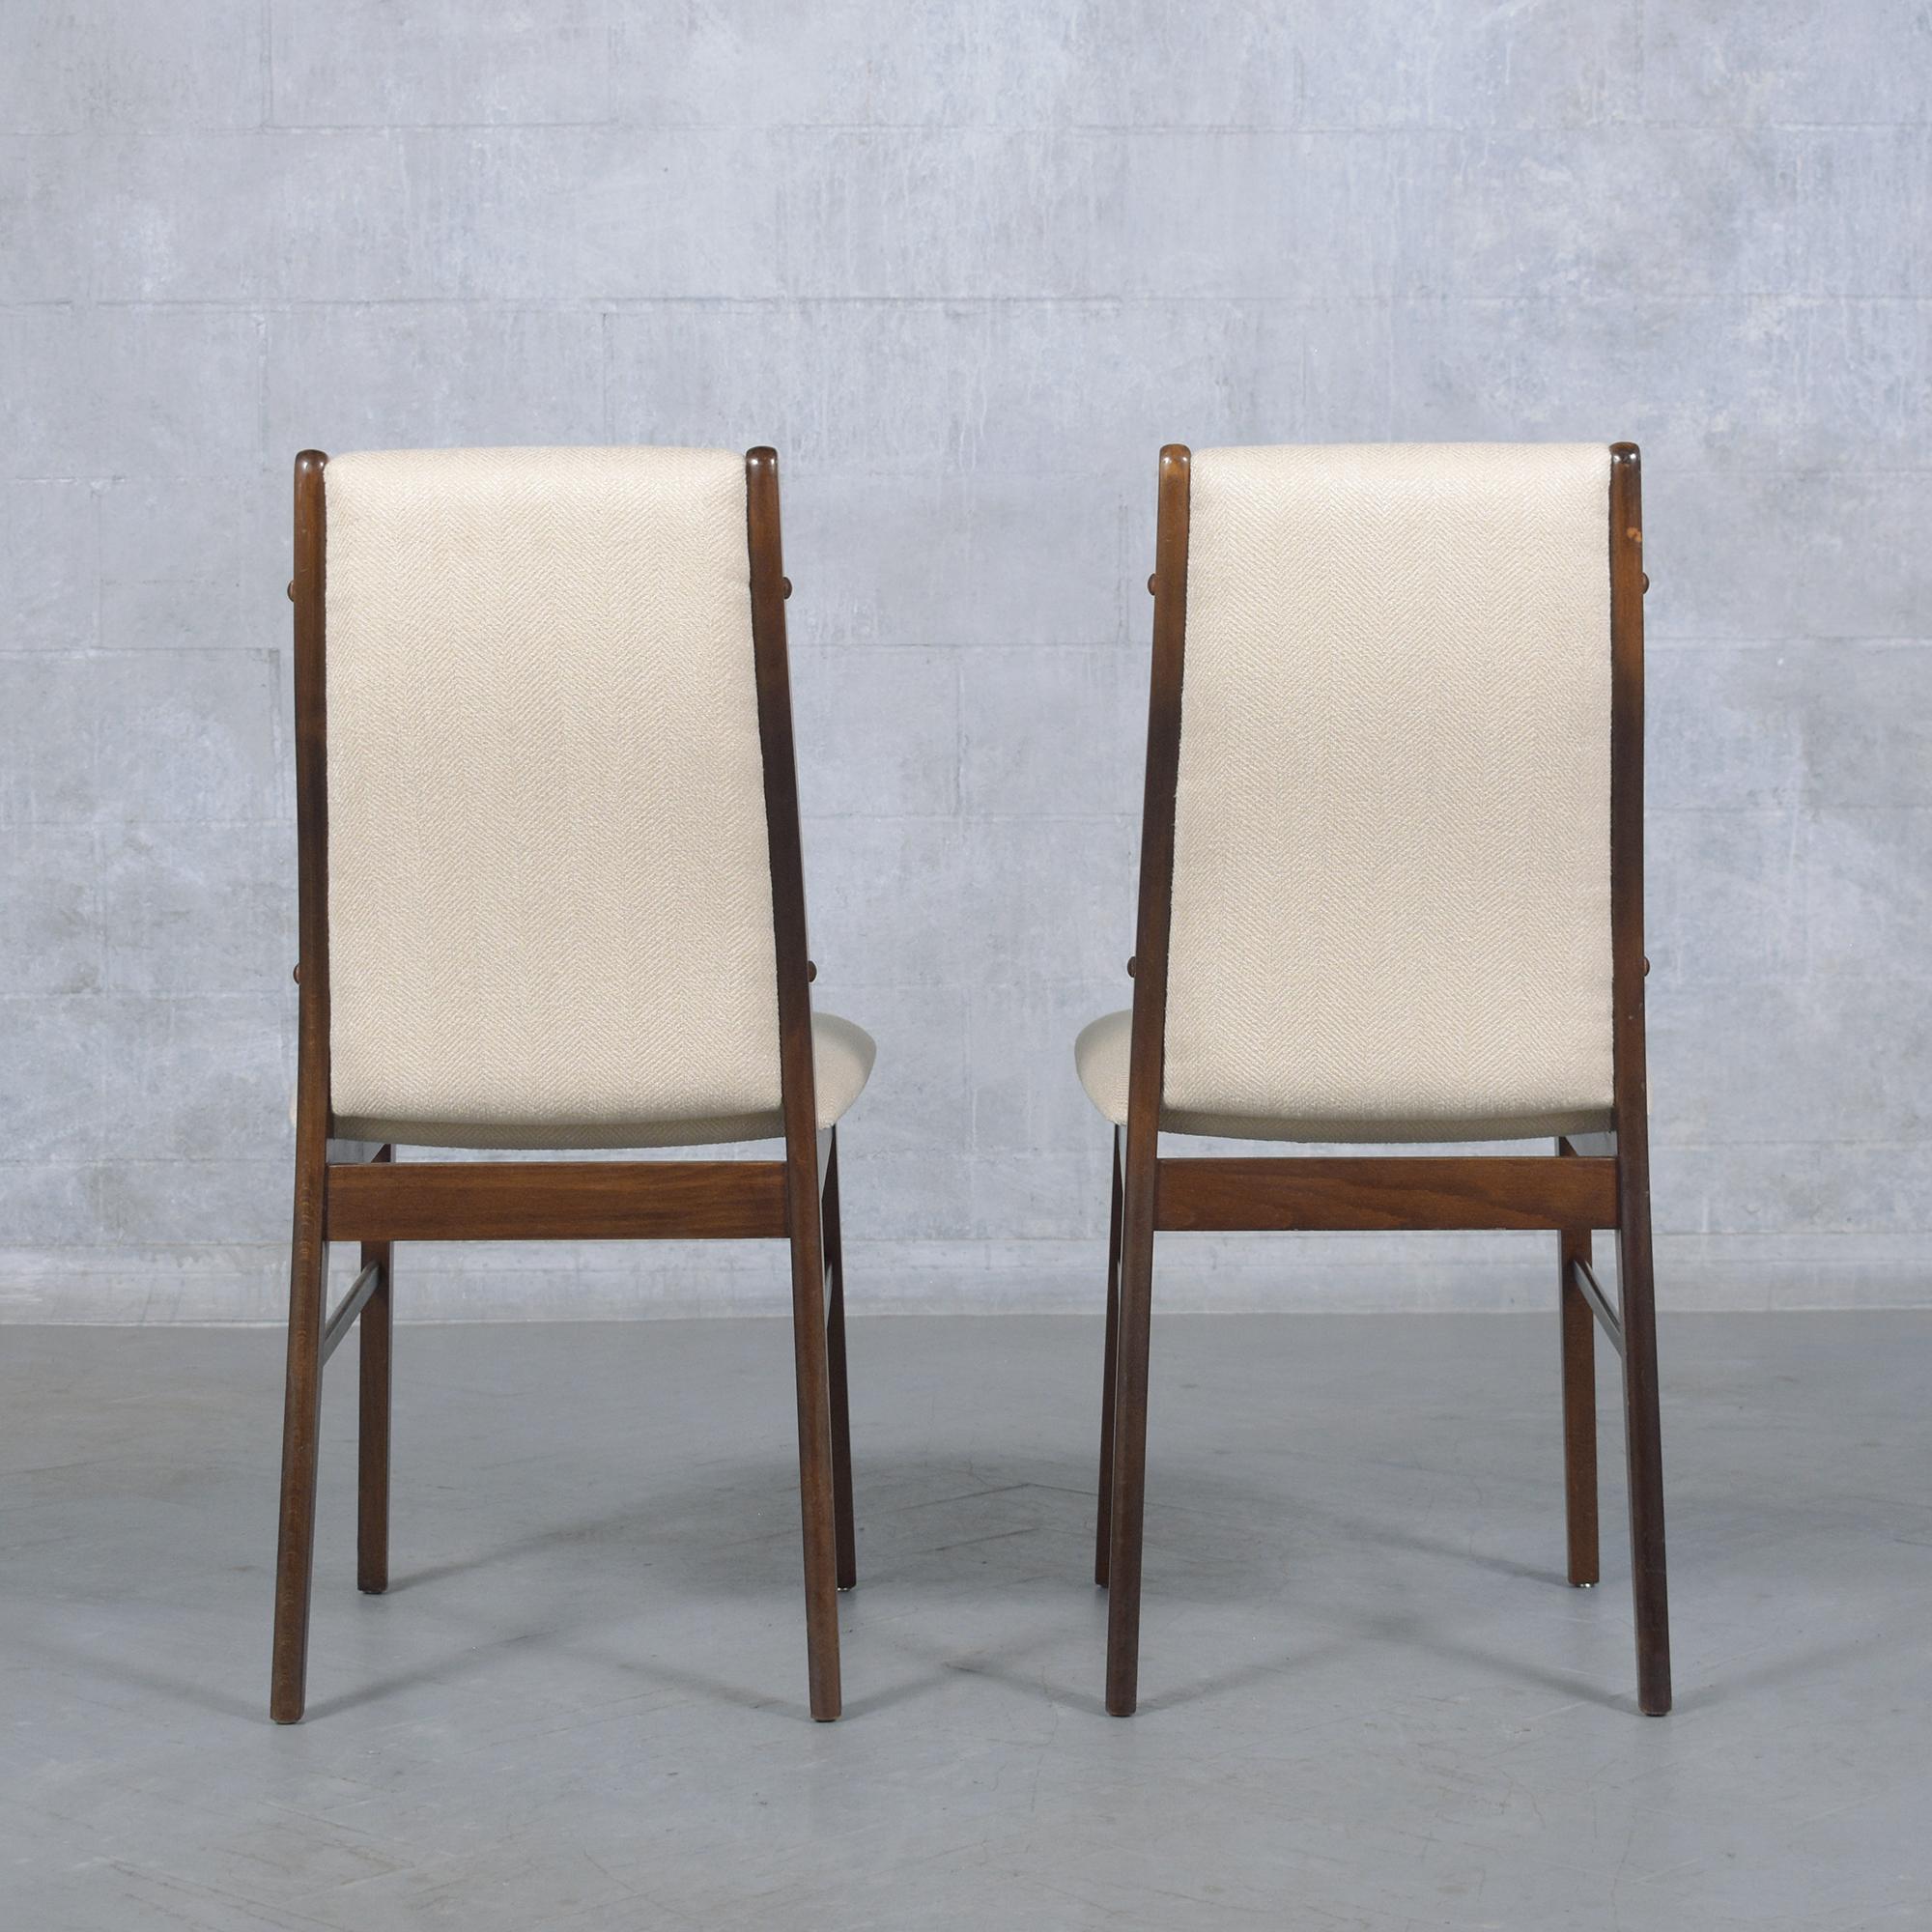 Exquisite Danish Teak Dining Chairs, Restored and Refined For Sale 6